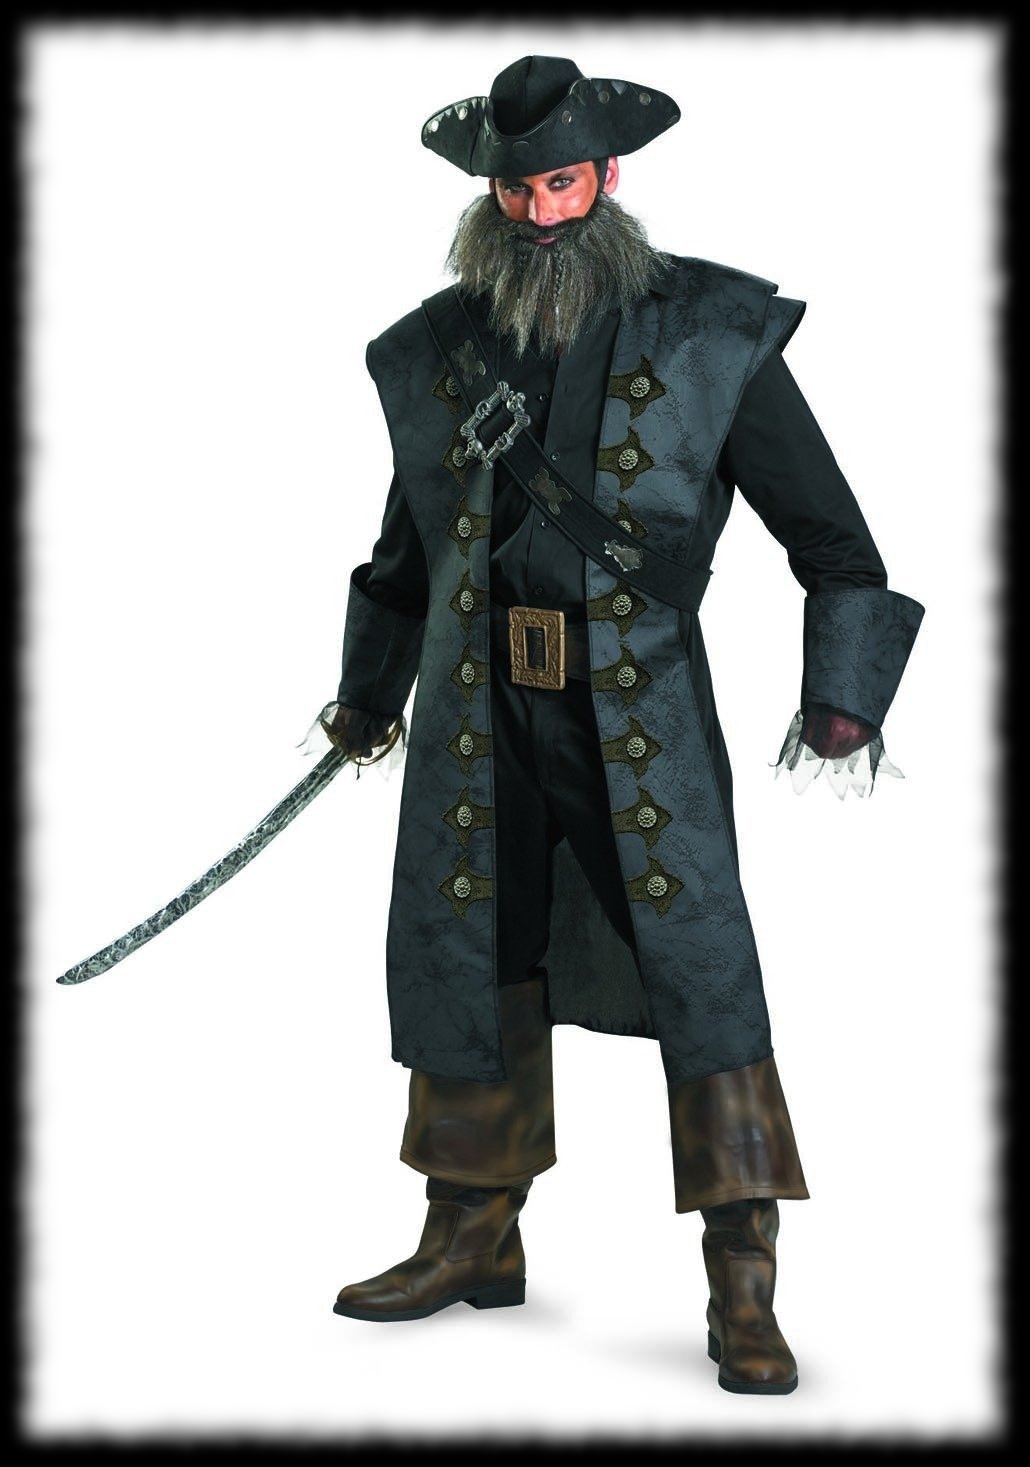 Black Beard Pirate Costume for Halloween Party